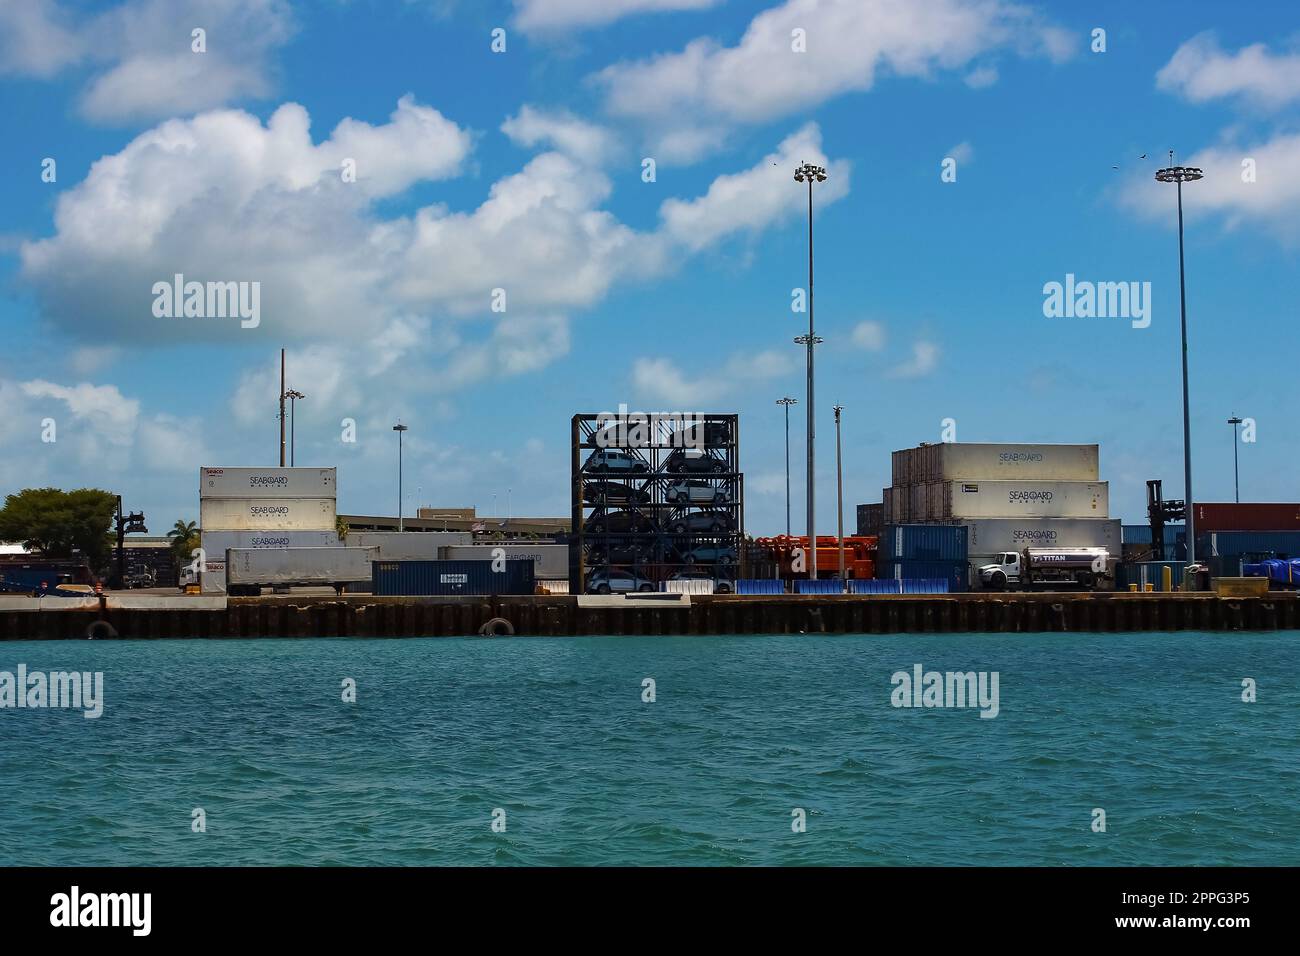 Many containers at Port Miami, one of the largest cargo ports in the US. Stock Photo